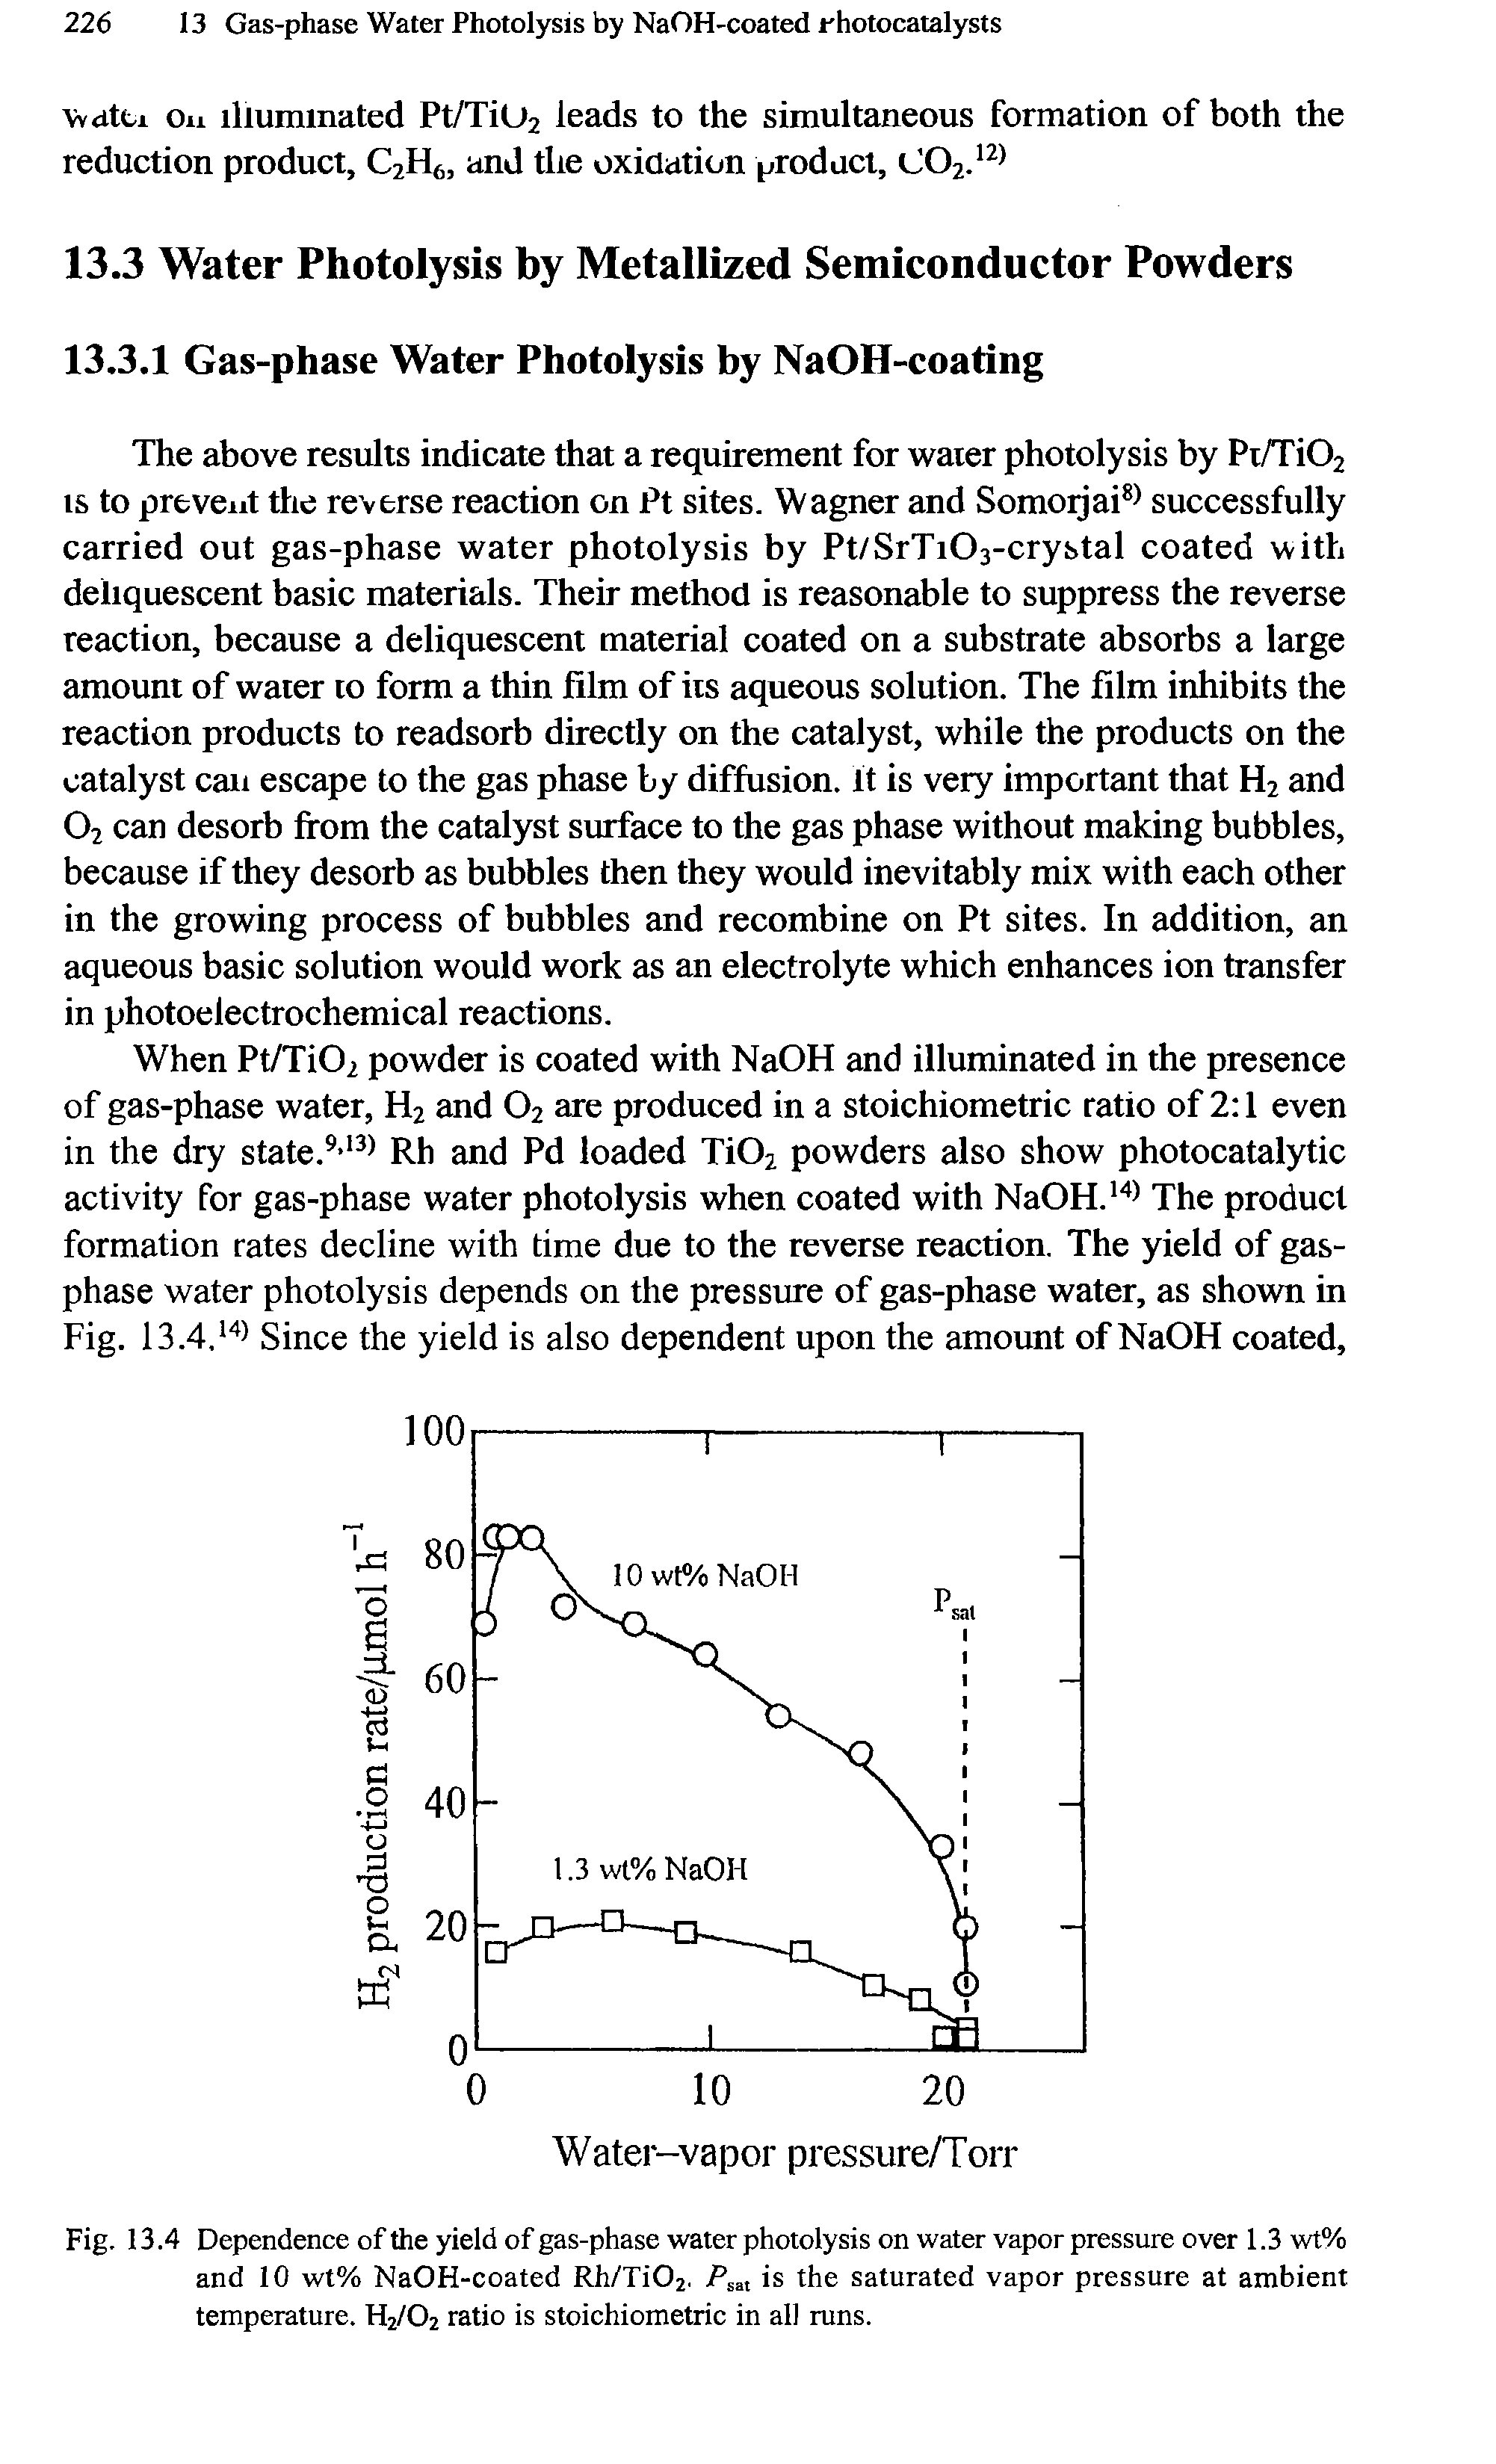 Fig. 13.4 Dependence of the yield of gas-phase water photolysis on water vapor pressure over 1.3 wt% and 10 wt% NaOH-coated Rh/Ti02. Psat is the saturated vapor pressure at ambient temperature. H2/02 ratio is stoichiometric in all runs.